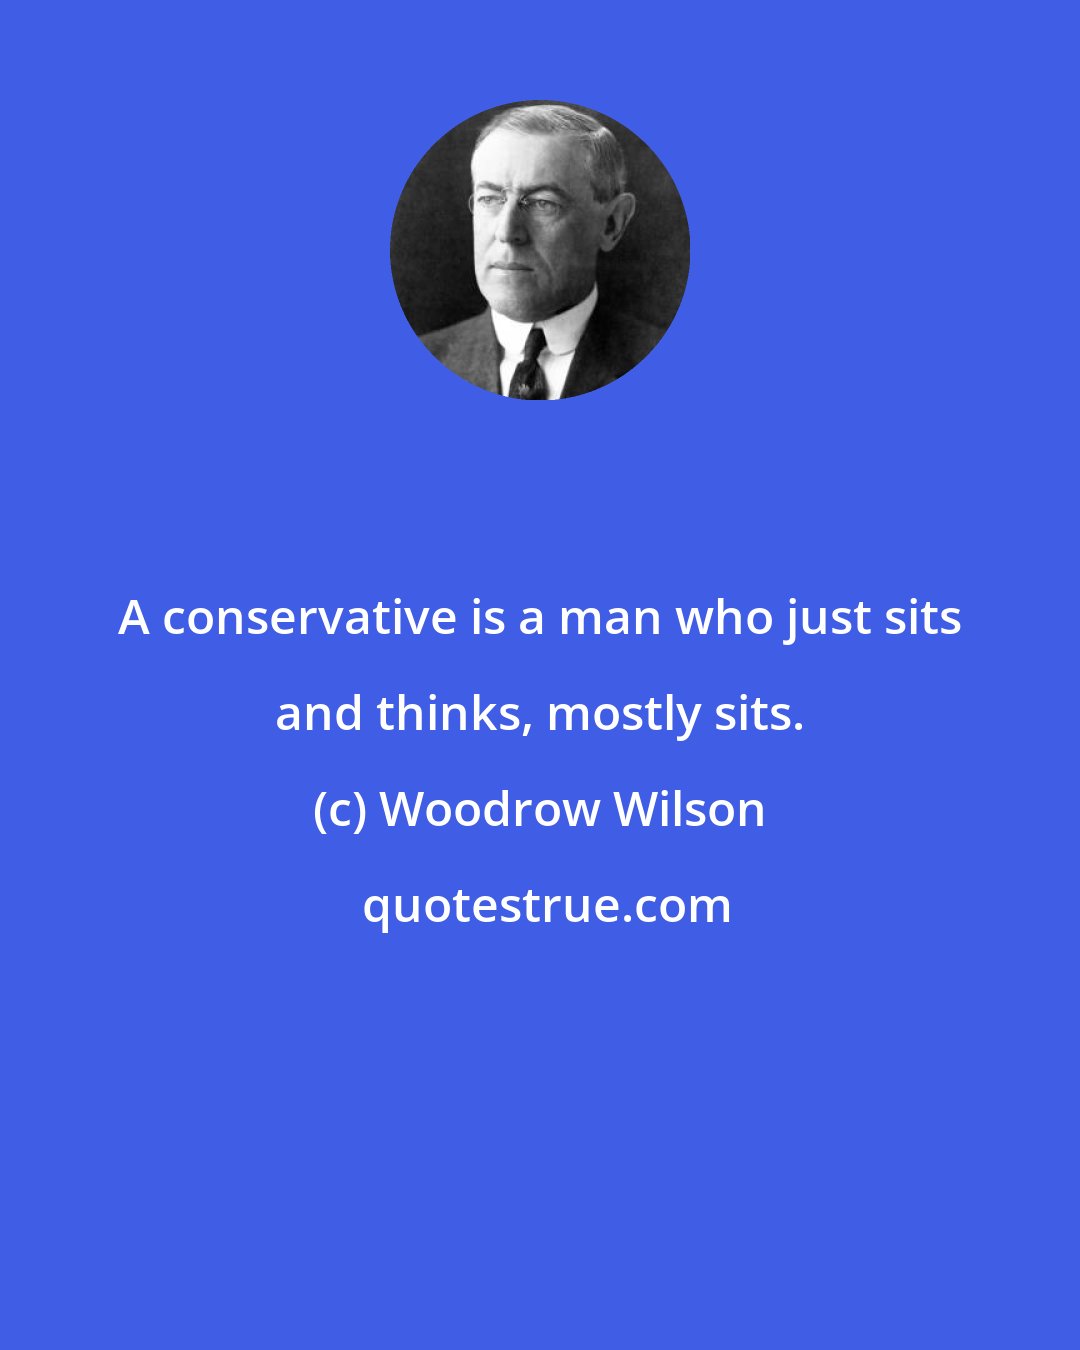 Woodrow Wilson: A conservative is a man who just sits and thinks, mostly sits.